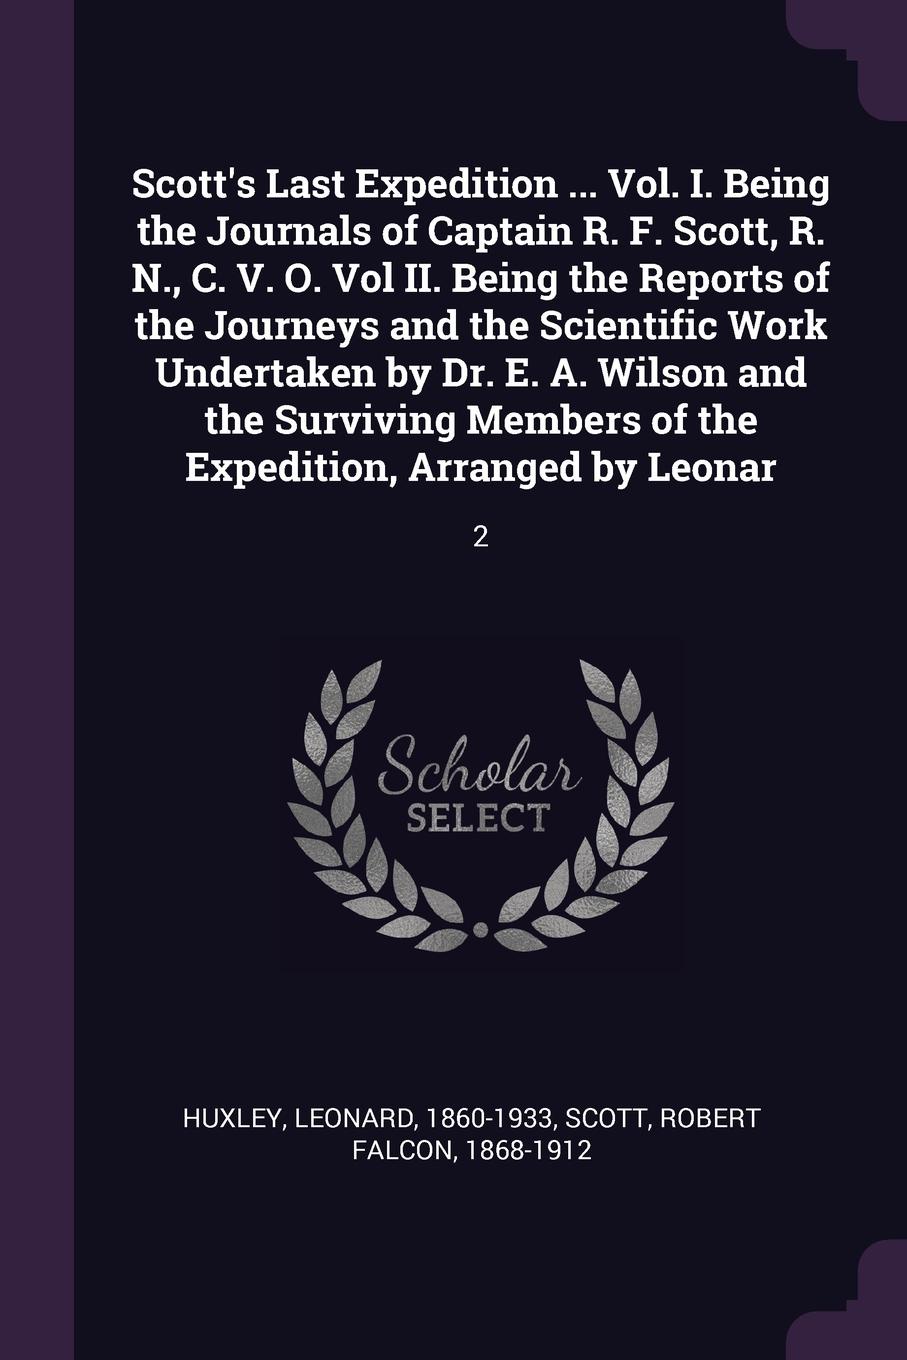 Scott`s Last Expedition ... Vol. I. Being the Journals of Captain R. F. Scott, R. N., C. V. O. Vol II. Being the Reports of the Journeys and the Scientific Work Undertaken by Dr. E. A. Wilson and the Surviving Members of the Expedition, Arranged b...